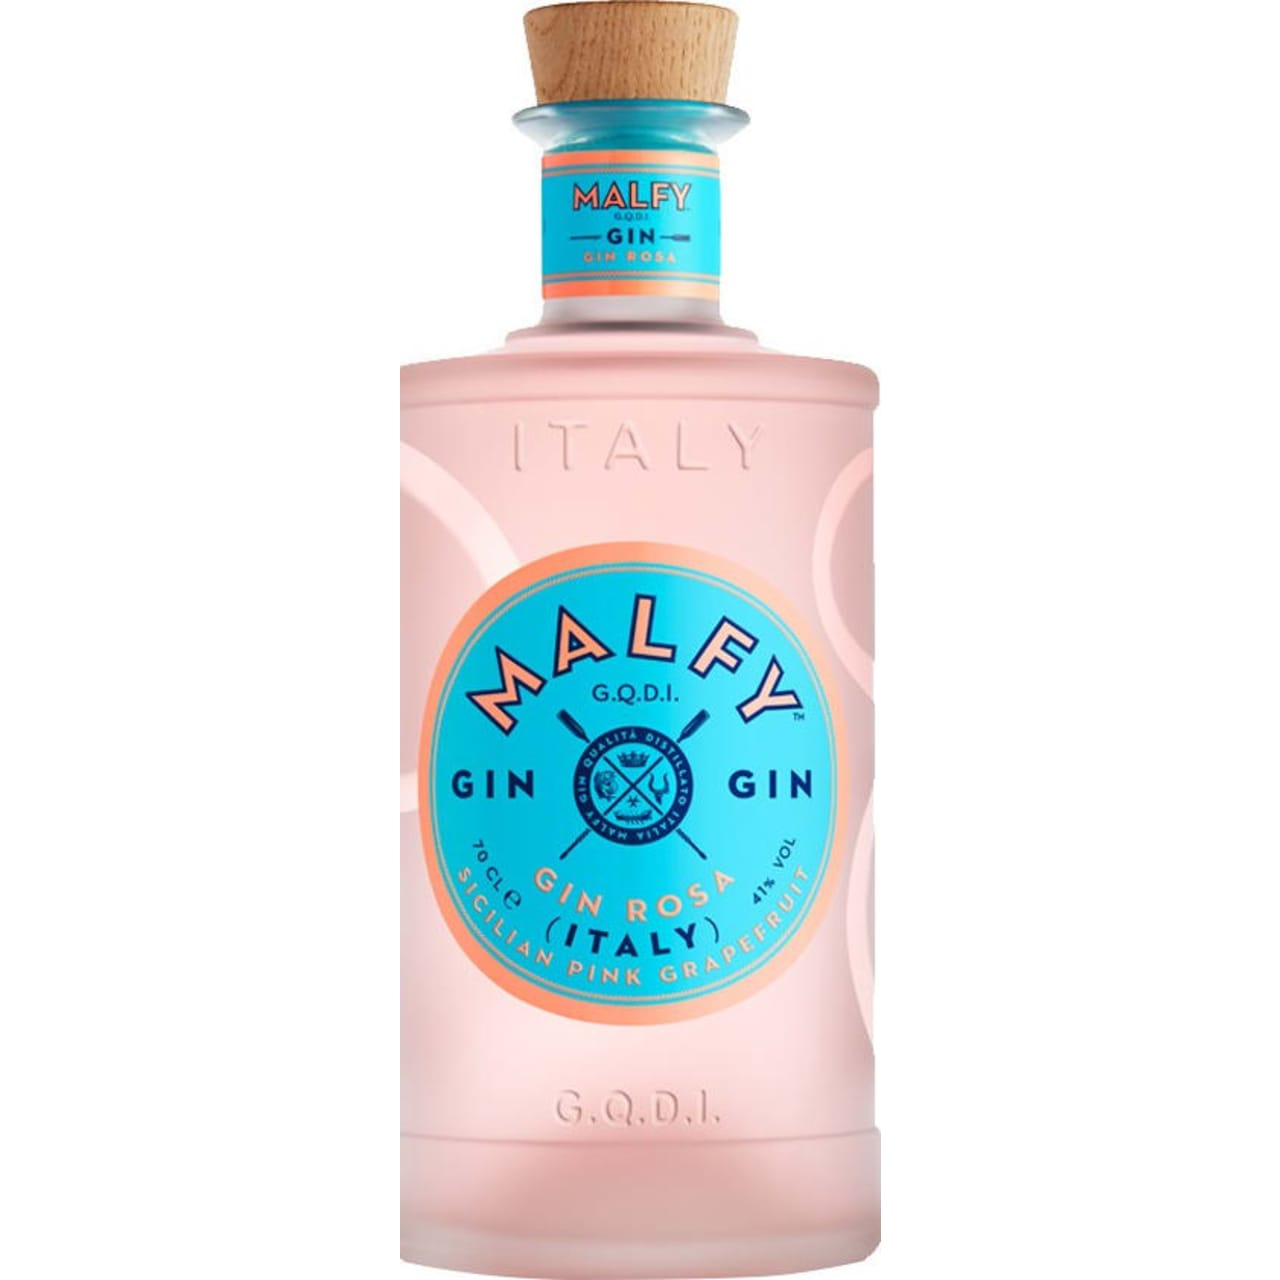 The Malfy Gin Rosa is an Italian gin built around the delicious taste of Sicilian pink grapefruit, and features a hint of rhubarb too.